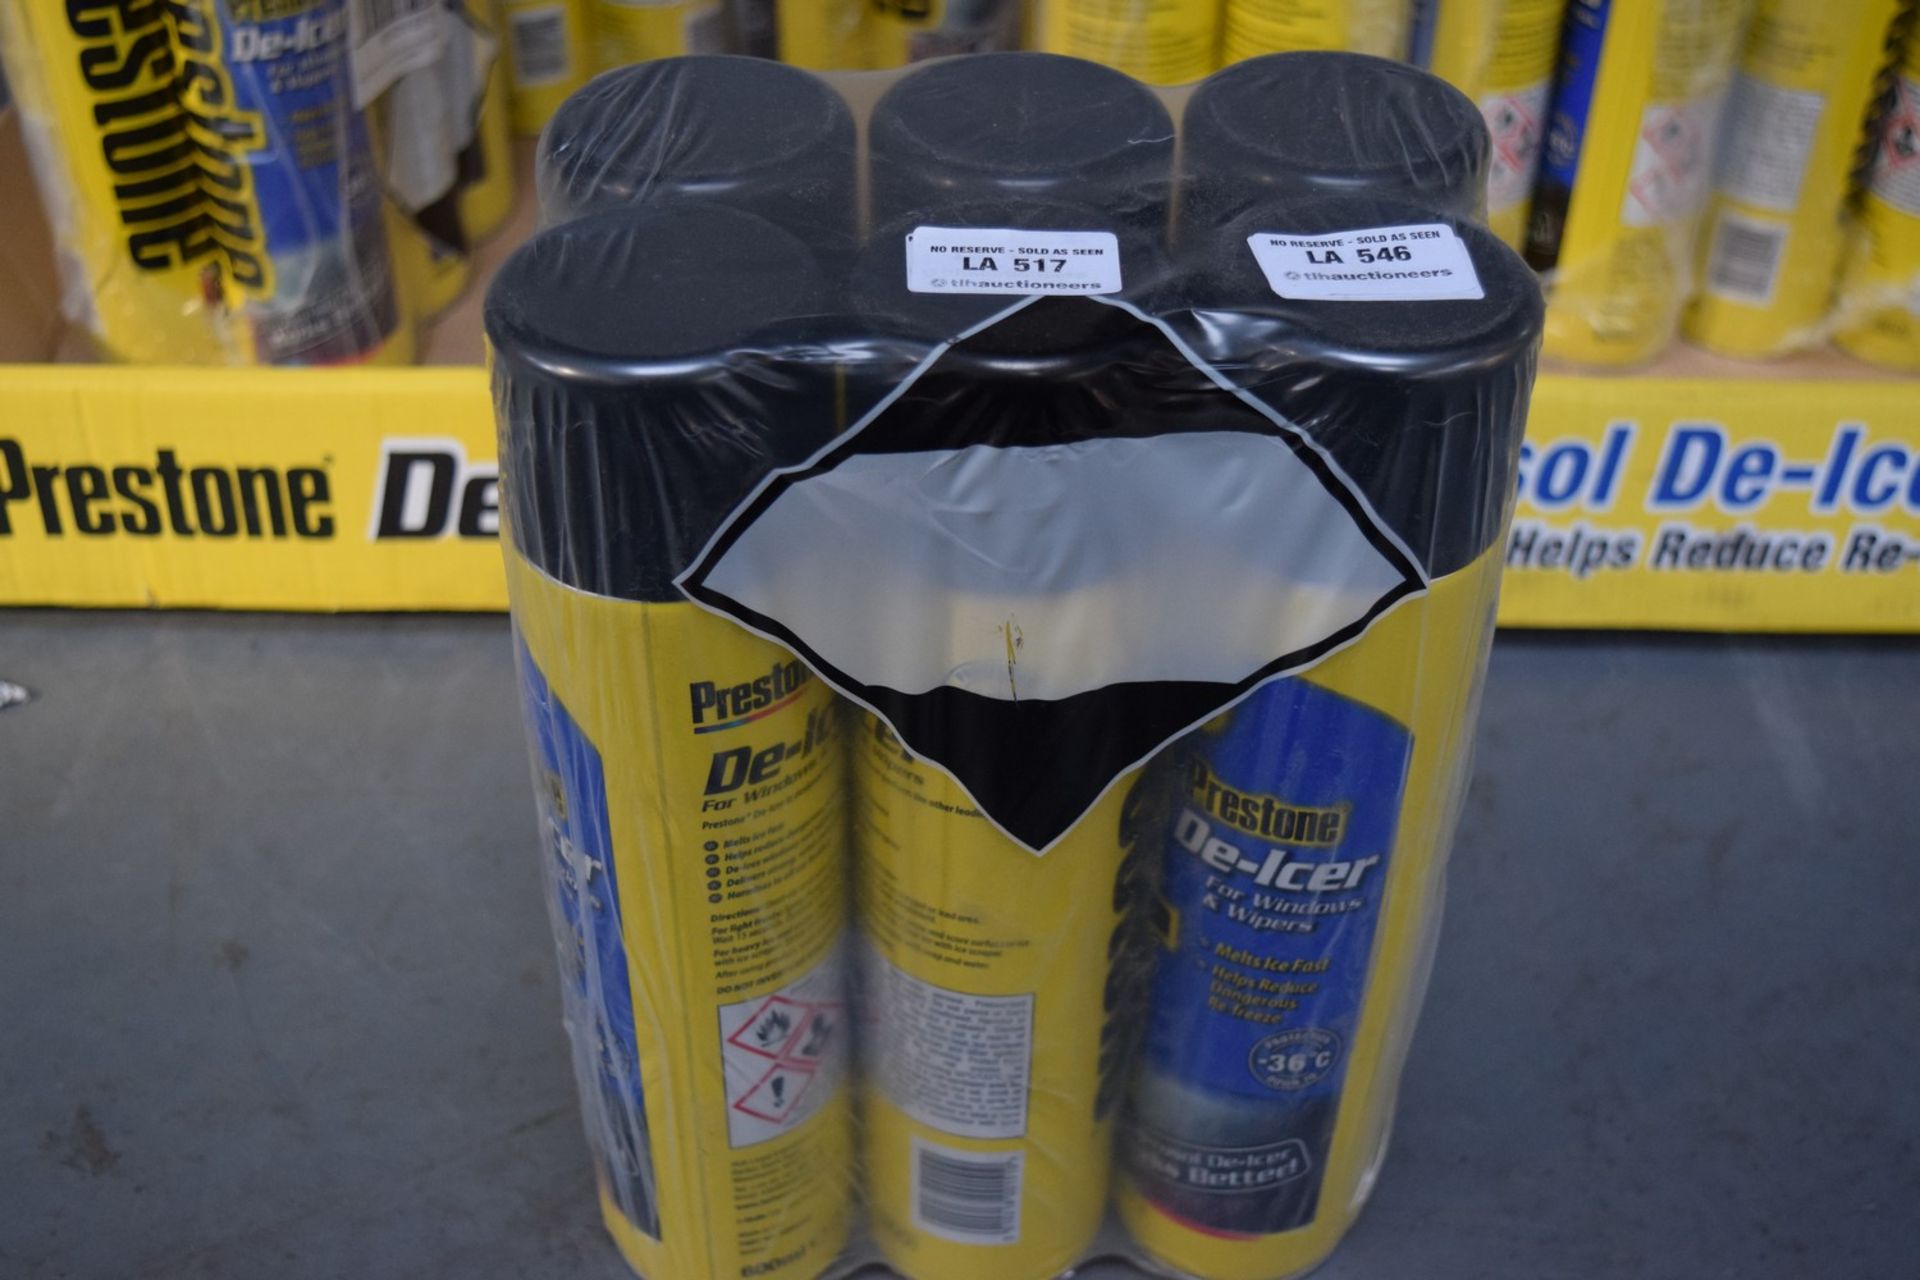 6 X 600ML CAN OF PRESTON DE-ICER FOR WINDOWS AND WIPERS RRP £3.50 EACH 26.04.16